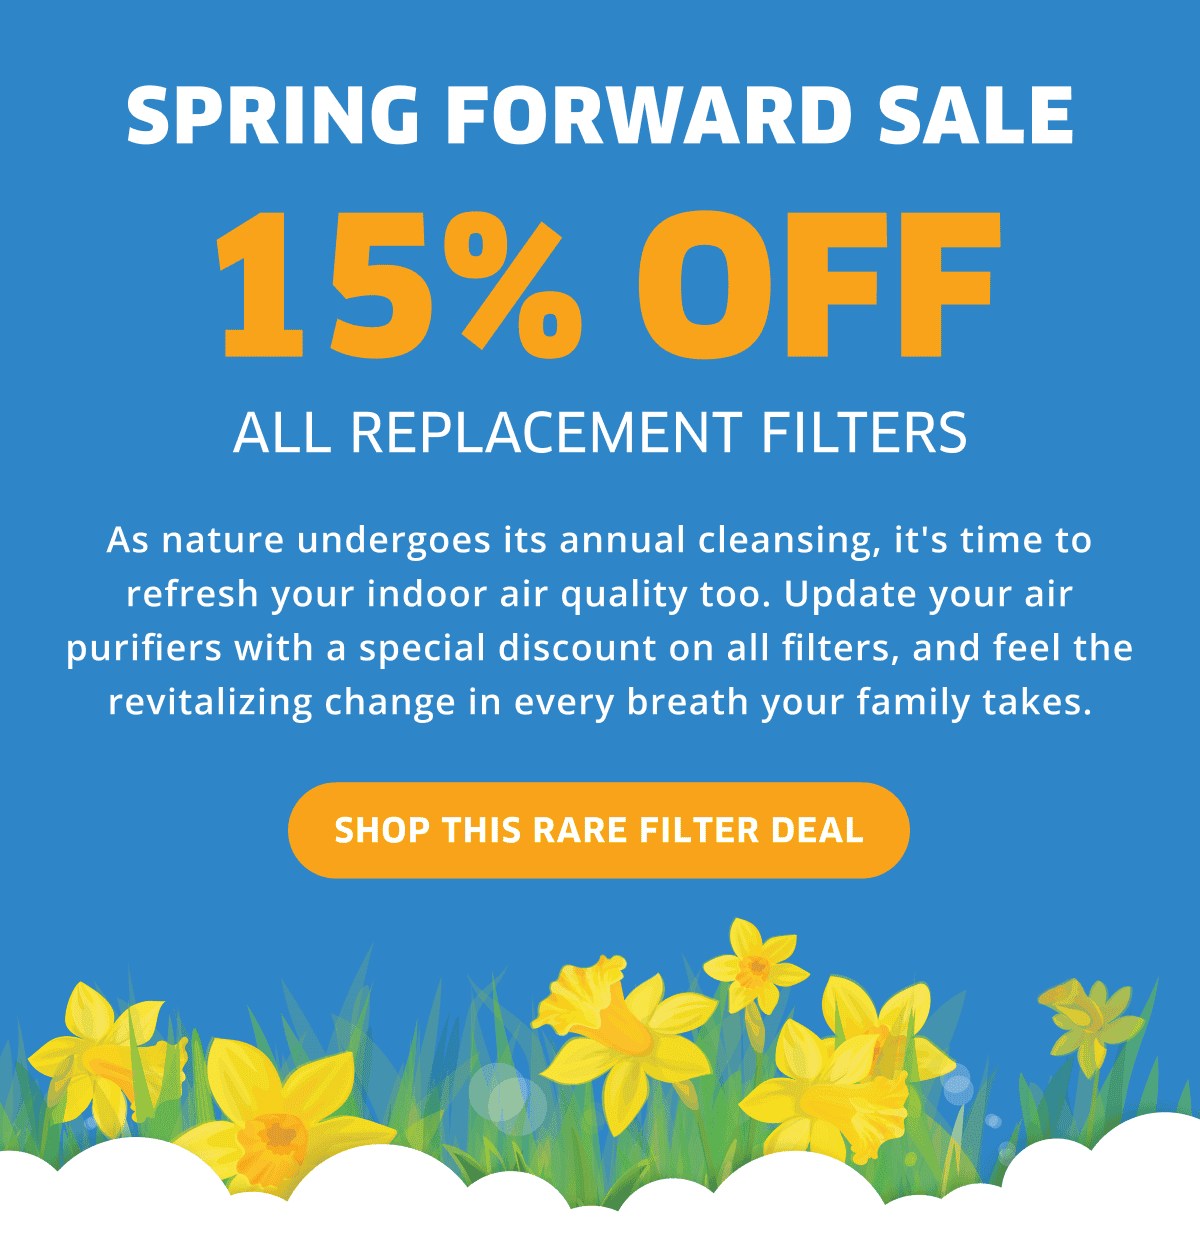 Spring Forward Sale 15% Off All Replacement Filters | Shop This Rare Filter Deal